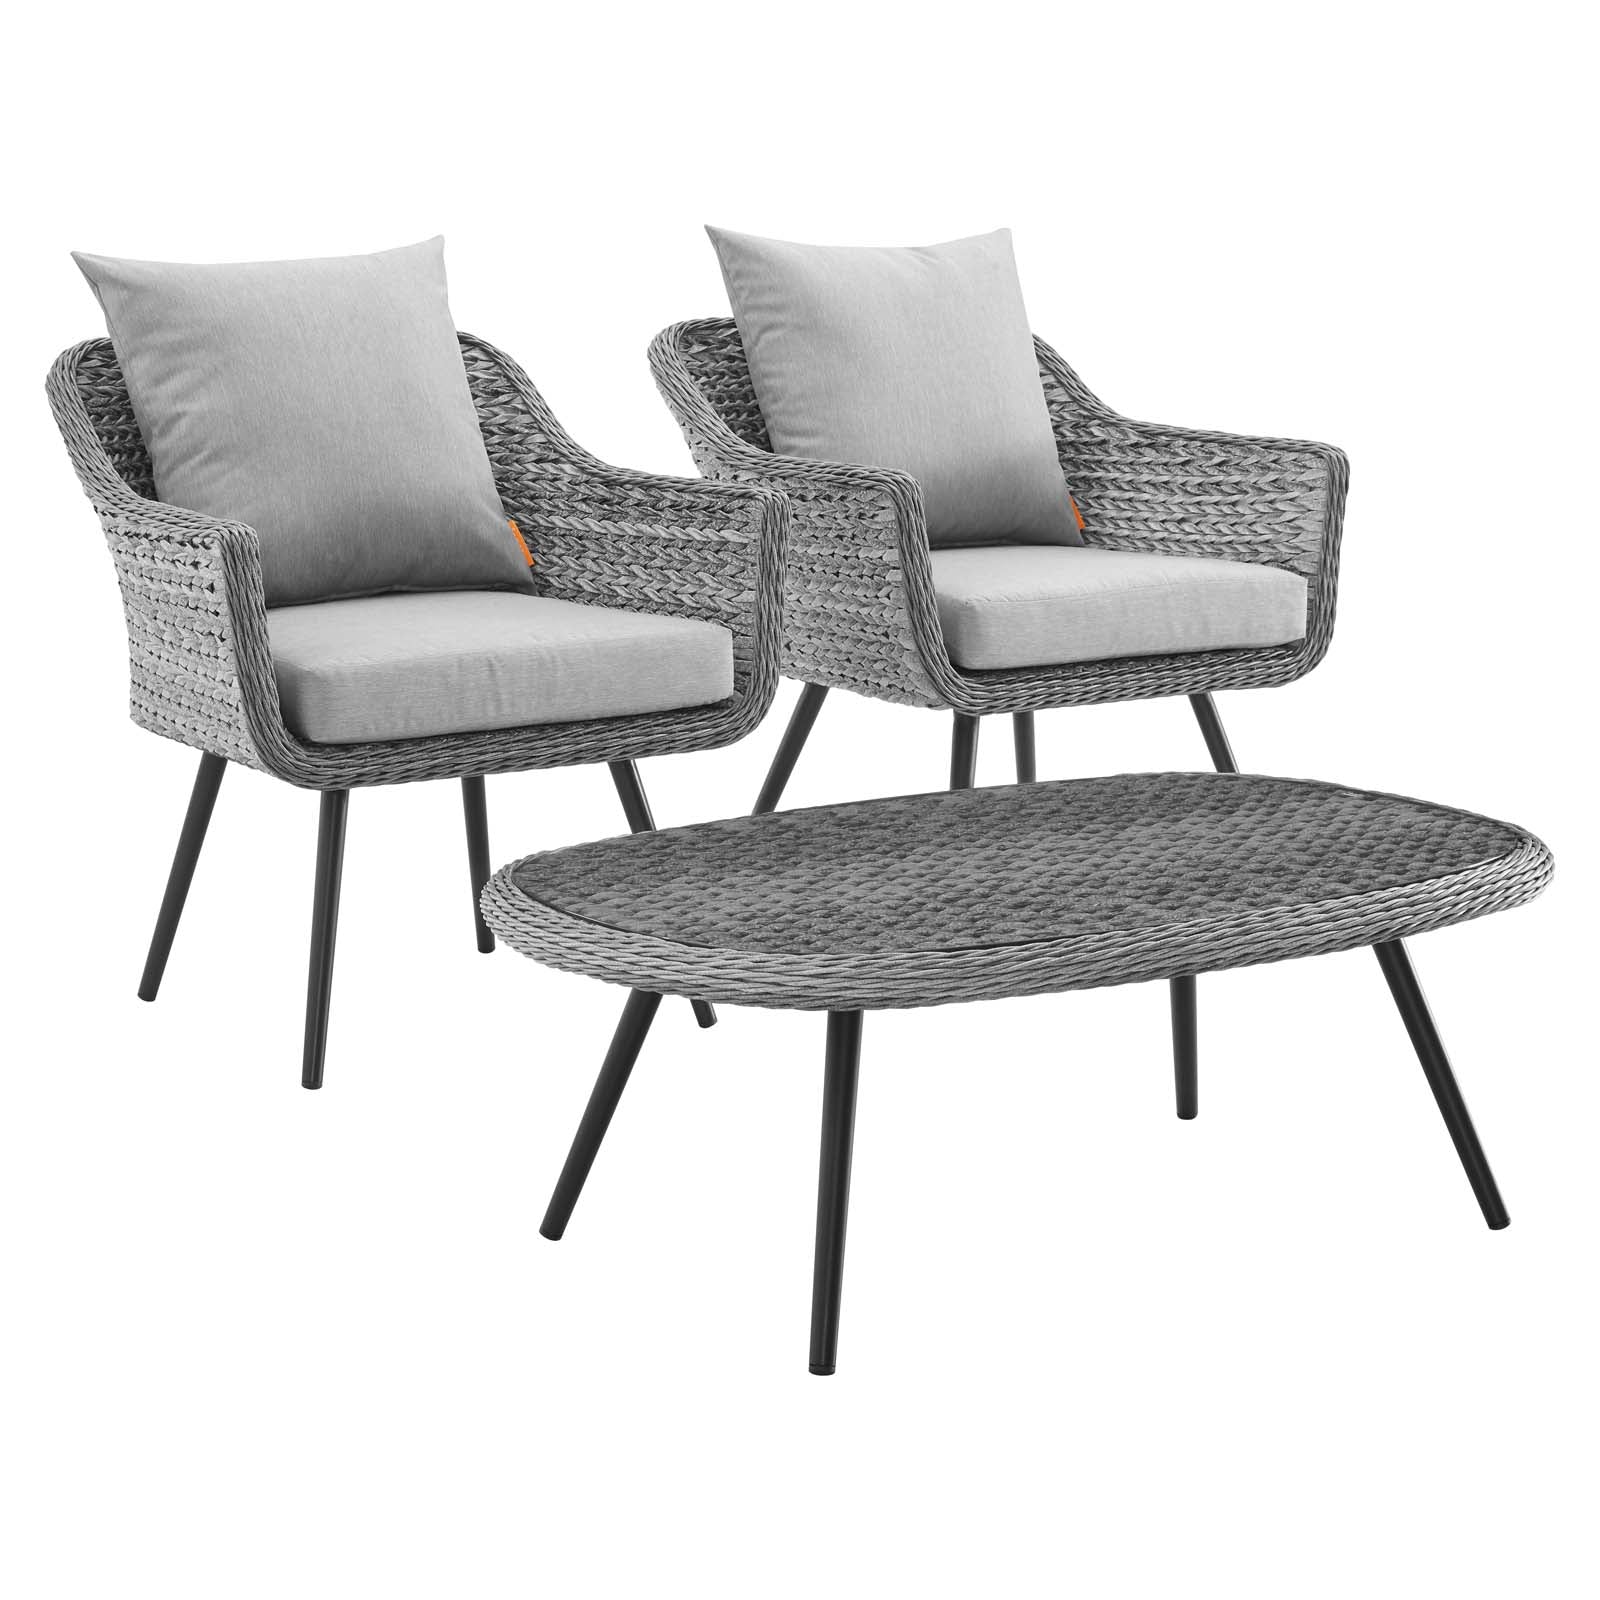 Endeavor 3 Piece Outdoor Patio Wicker Rattan Sectional Sofa Set-Outdoor Set-Modway-Wall2Wall Furnishings